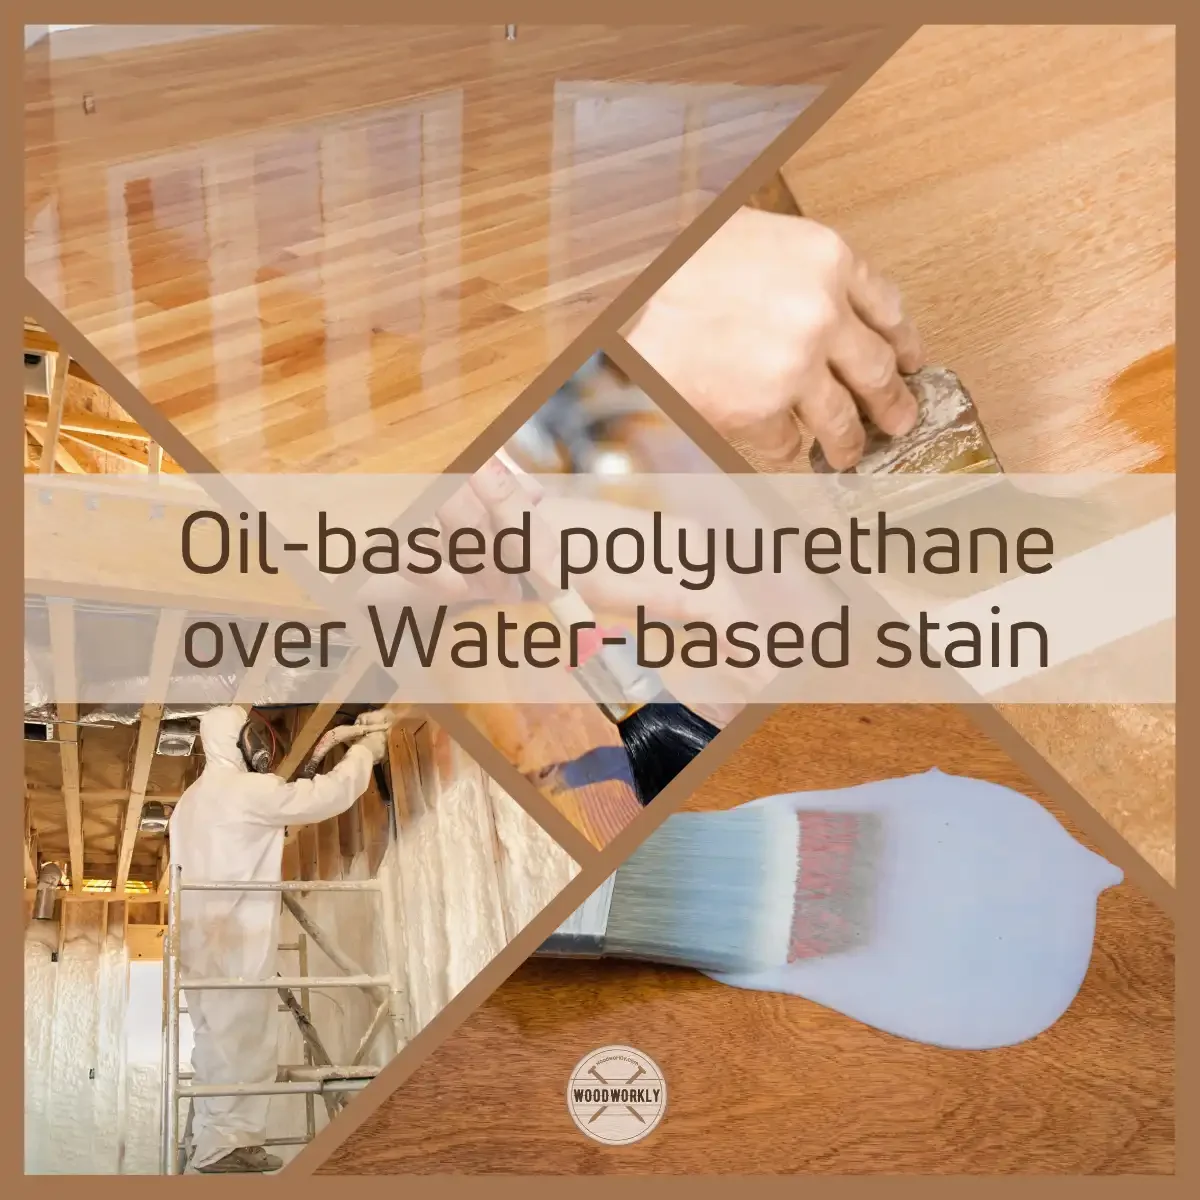 Oil-based polyurethane over Water-based stain